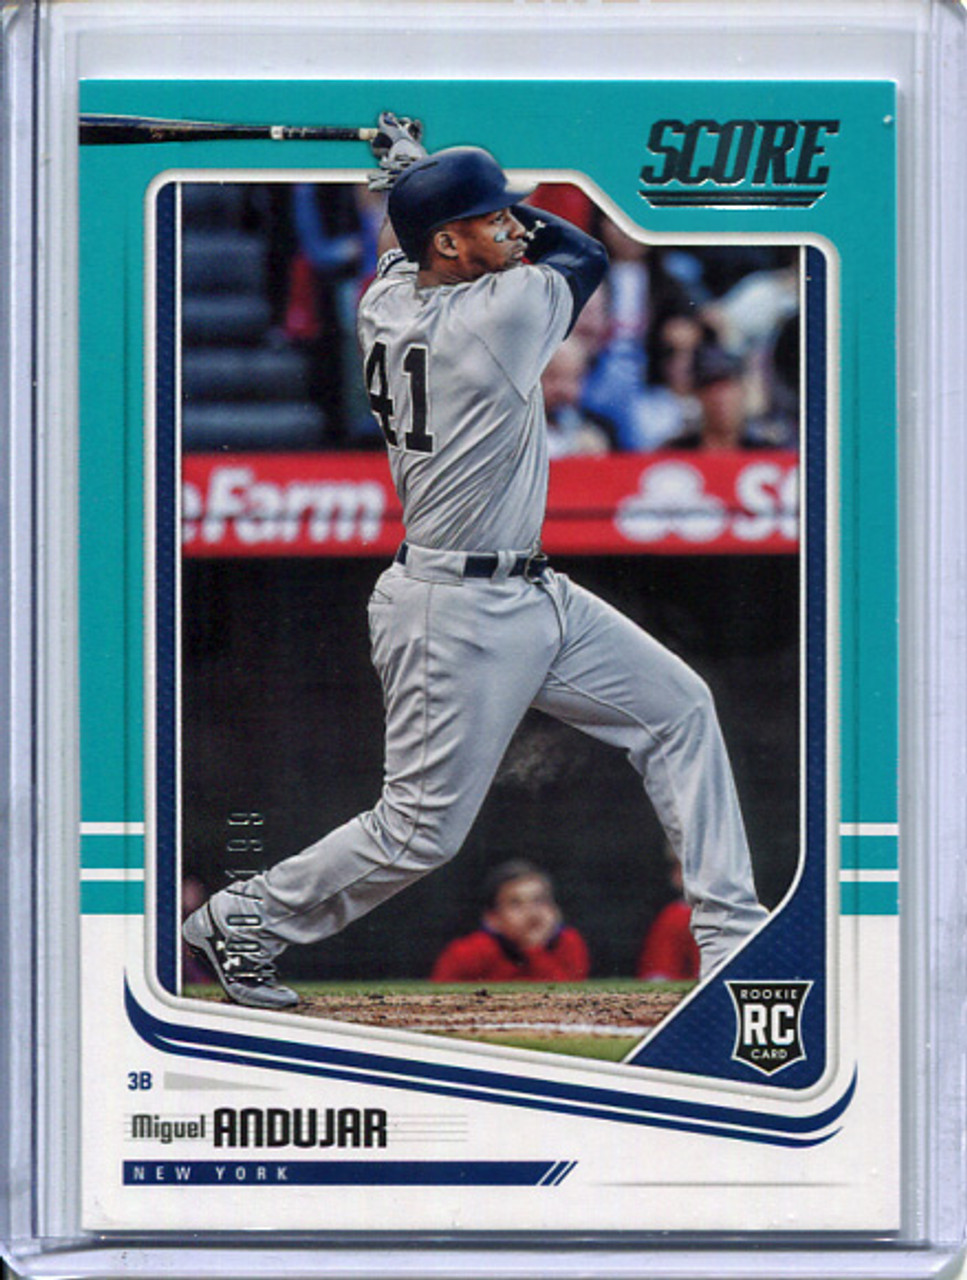 Miguel Andujar 2018 Chronicles, Score #30 Teal (#100/199)